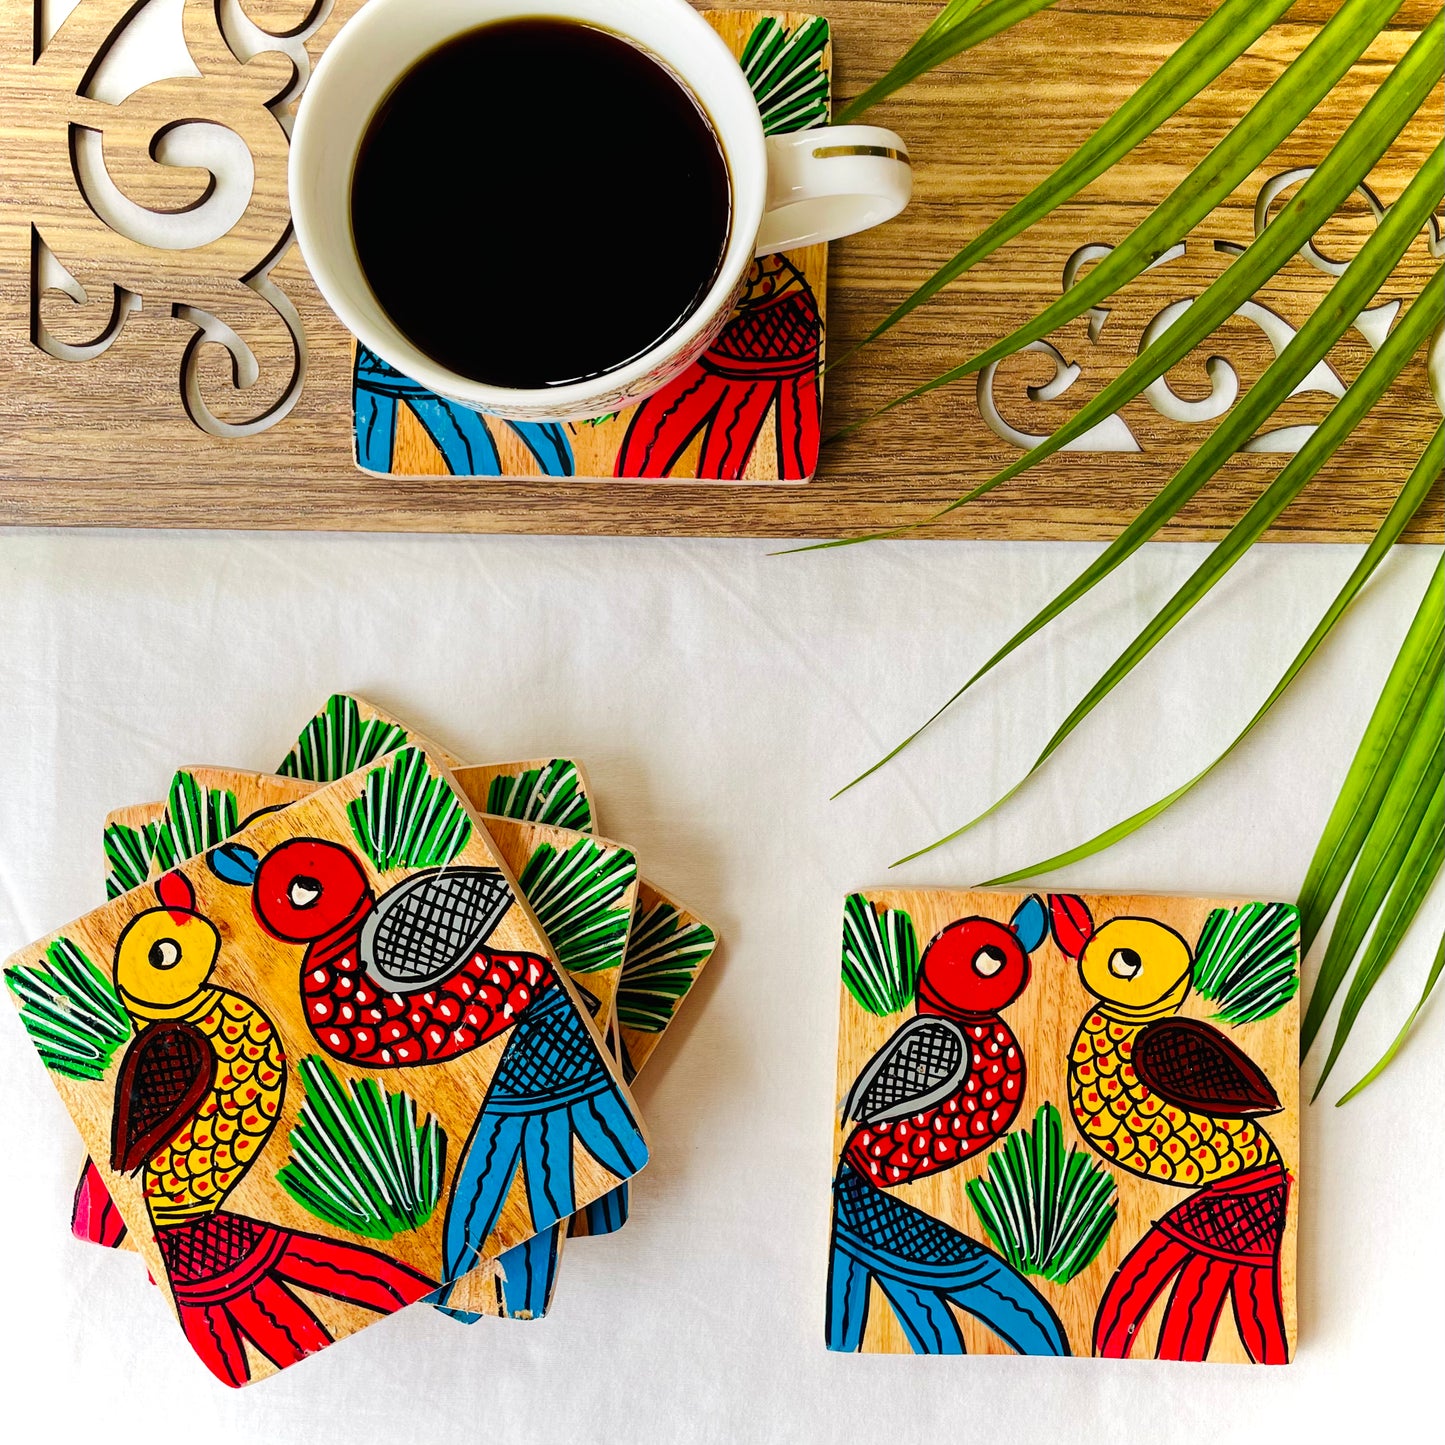 Five pure mango wood square wood coasters painted with one yellow bird with red feathers and a beak and one red with blue feathers and a beak along with some leaf in each wood coaster are placed near a teacup on a wood coaster filled with black tea with leaves in the background